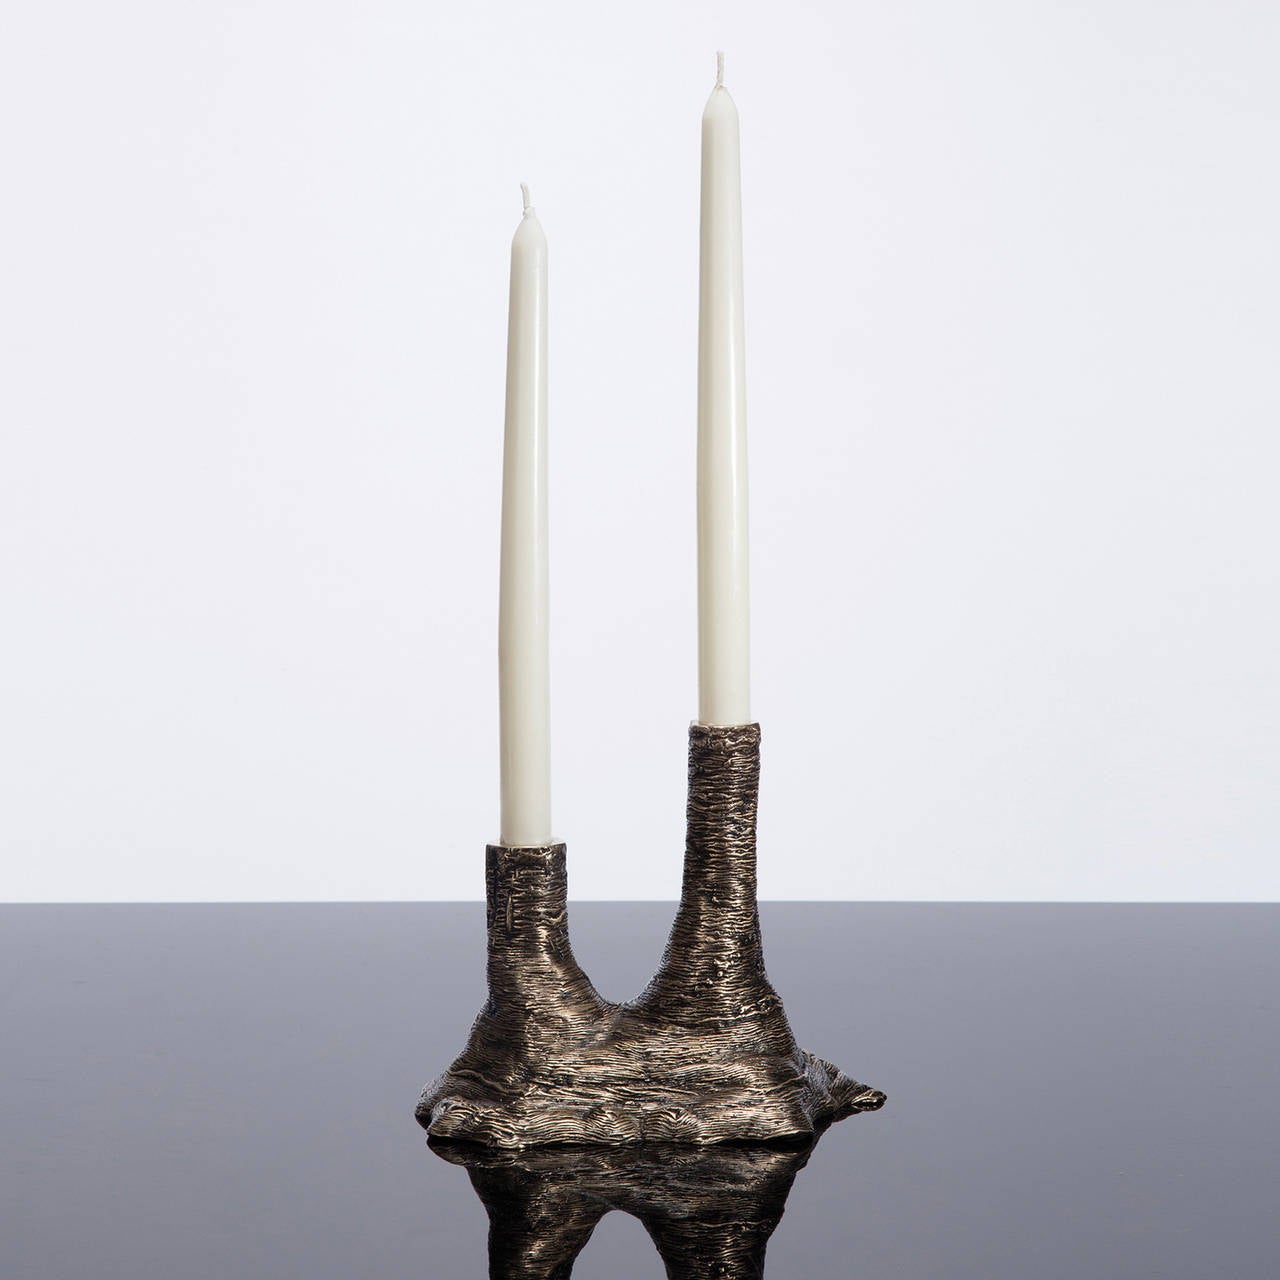 Ice-Cast Bronze Double Candleholder by Steven Haulenbeek available from LMD/studio. 

Each vessel or object is hand casted in bronze using Haulenbeek's trademark 